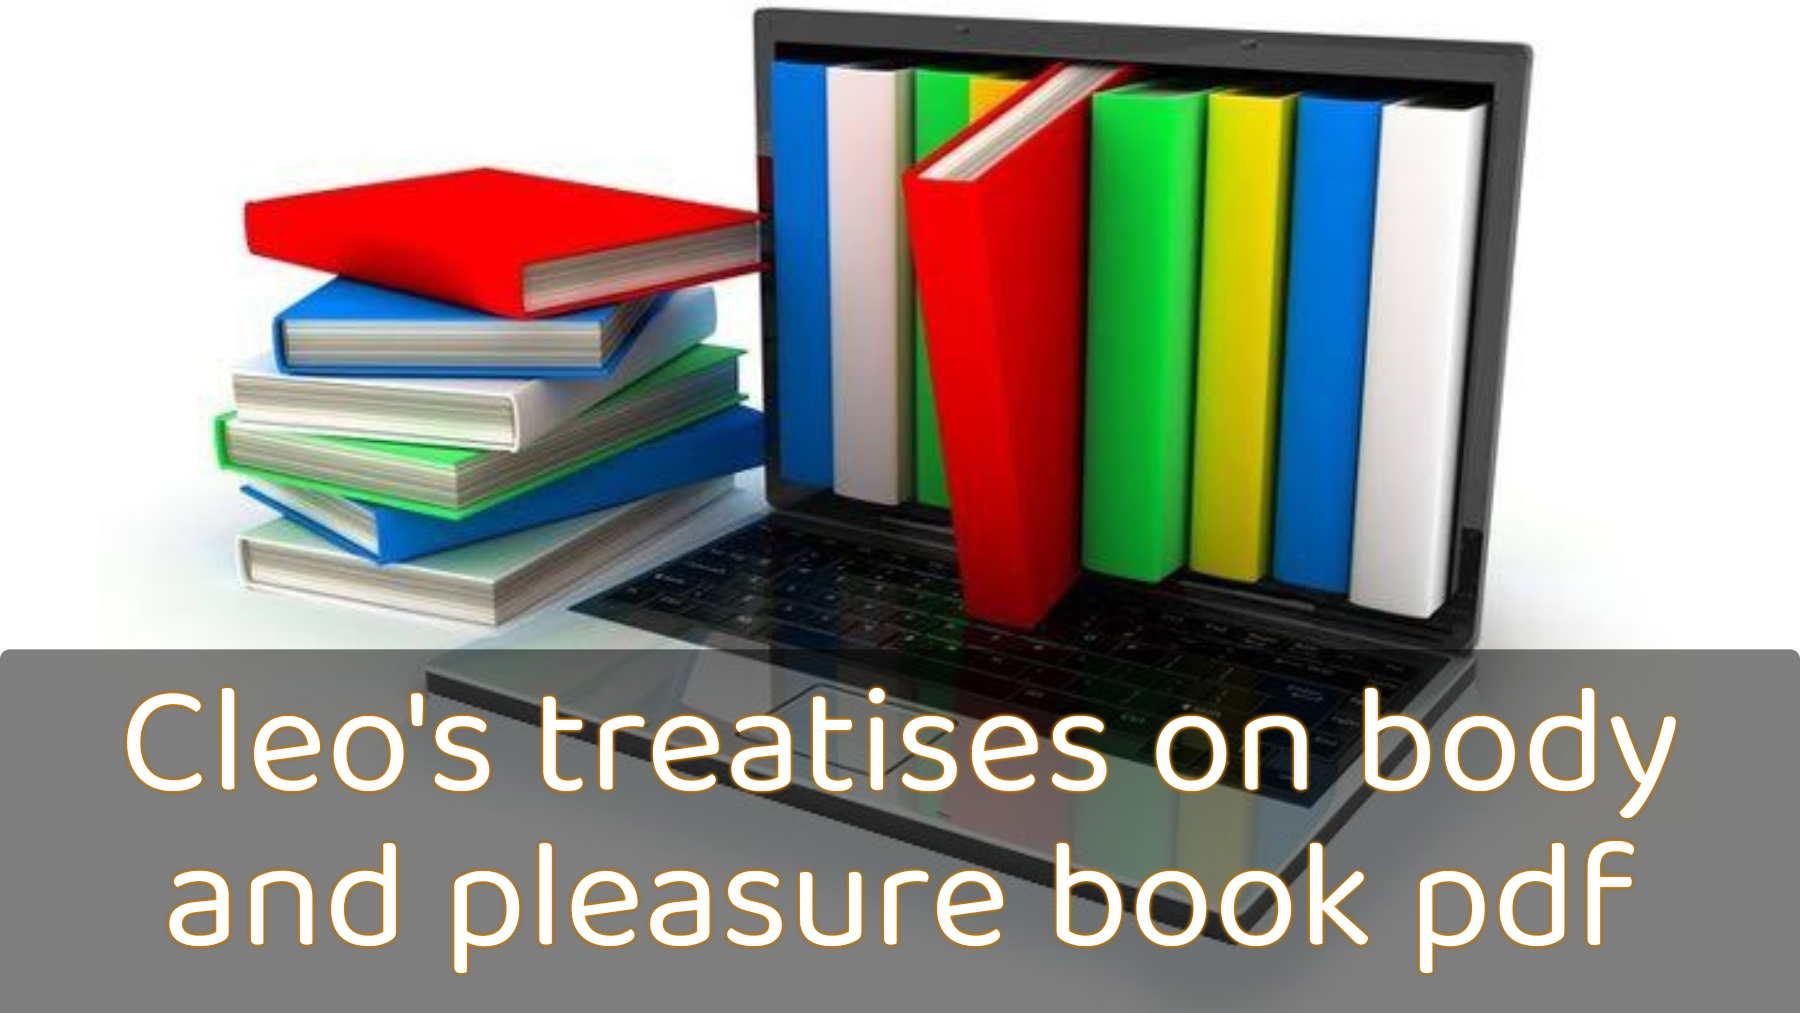 Cleo's treatises on body and pleasure book pdf, Ive read all 12 volumes of cleos treatises on pleasure, Cleo's treatises on body and pleasure book, Cleo's treatises on body and pleasure